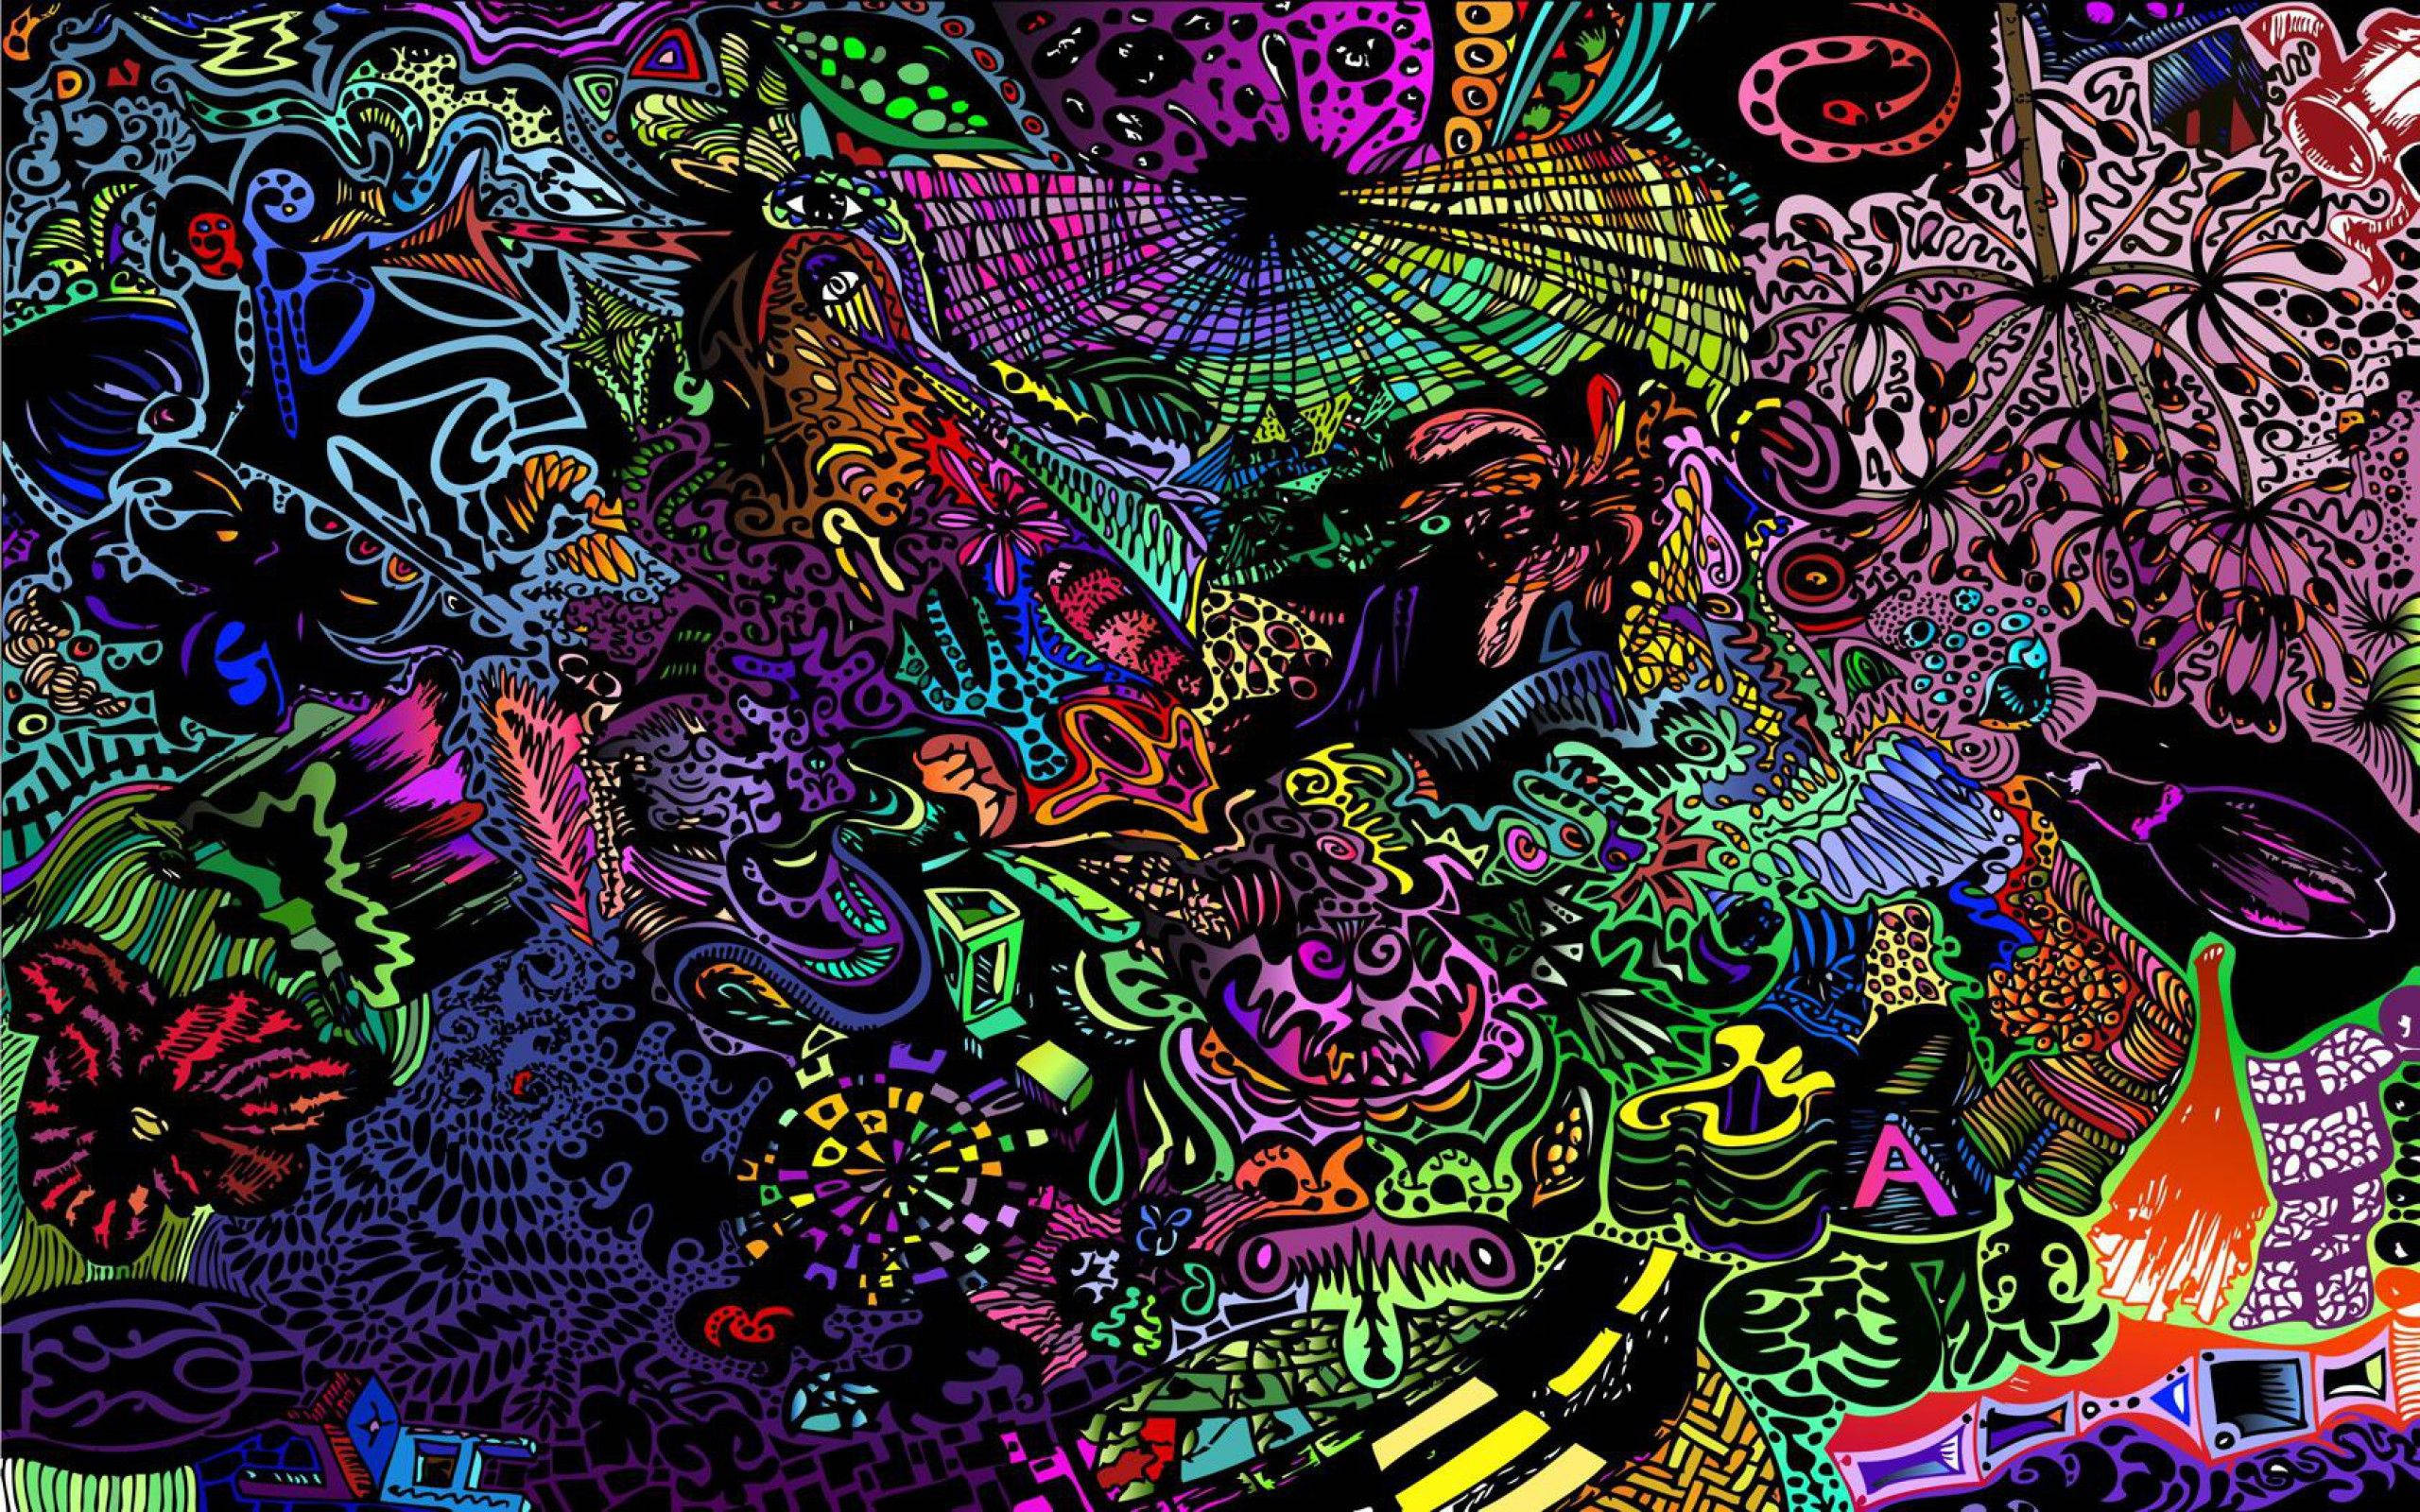 A colorful abstract artwork with many different colors - Trippy